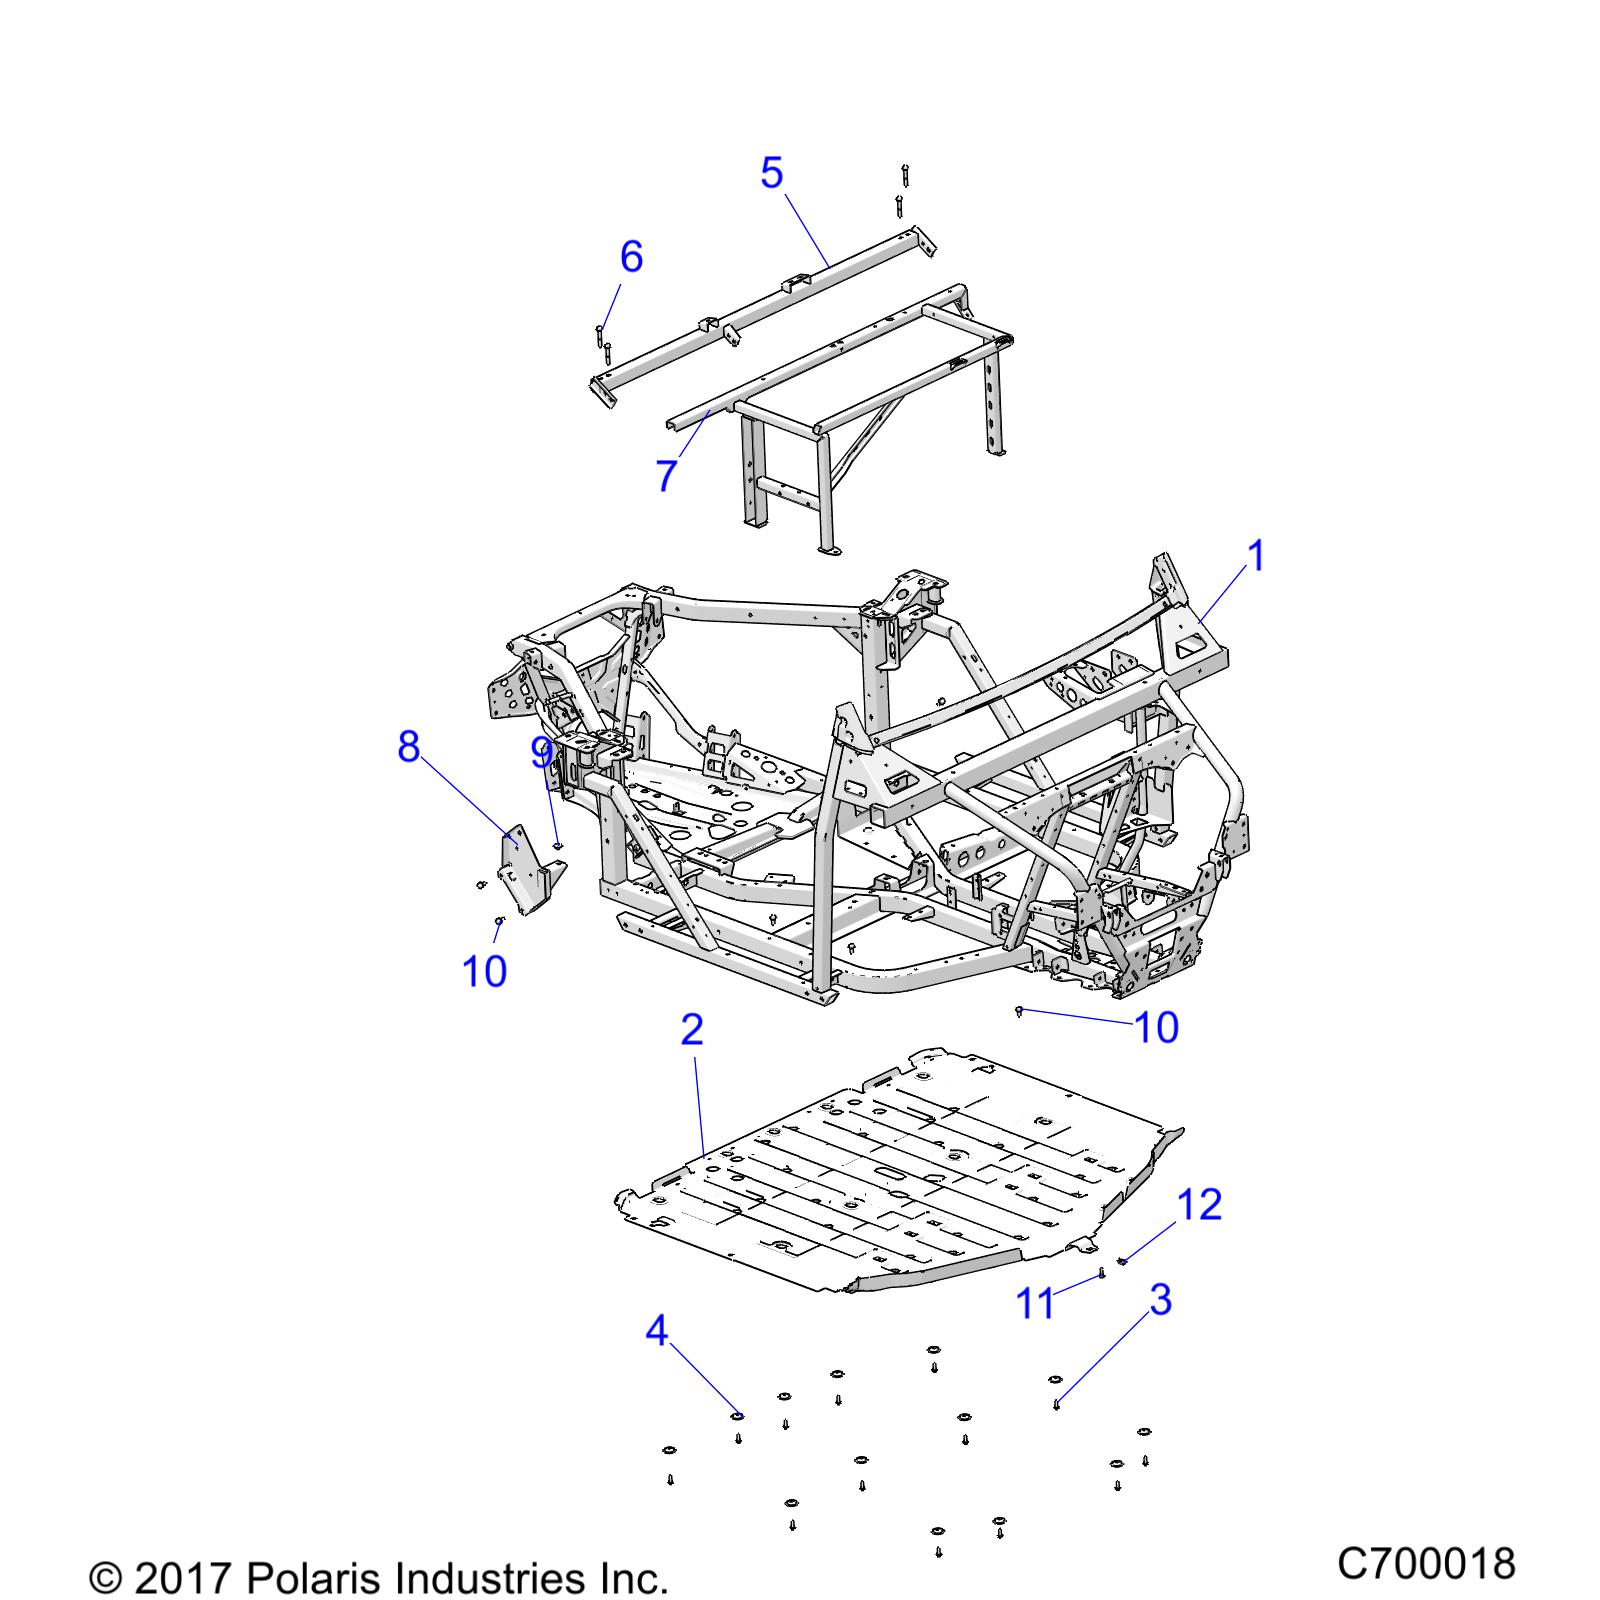 CHASSIS, MAIN FRAME AND SKID PLATES - R20RRW99A9/AA/AF/AP/AX/B9/BA/BF/BP/BX (C700018)